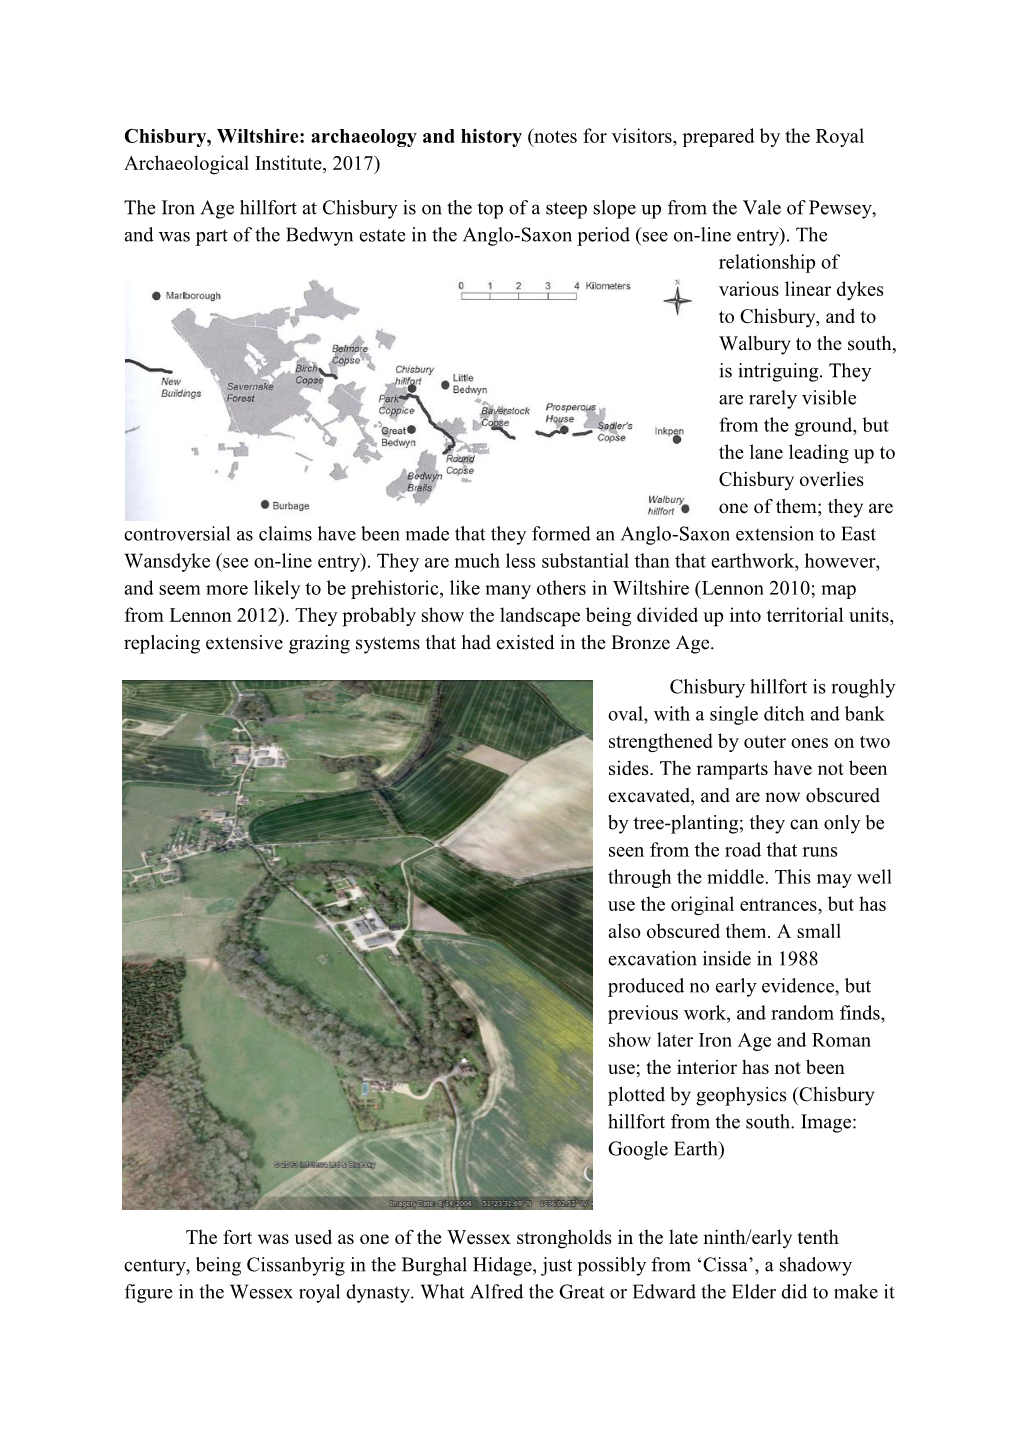 Chisbury, Wiltshire: Archaeology and History (Notes for Visitors, Prepared by the Royal Archaeological Institute, 2017) the Iron